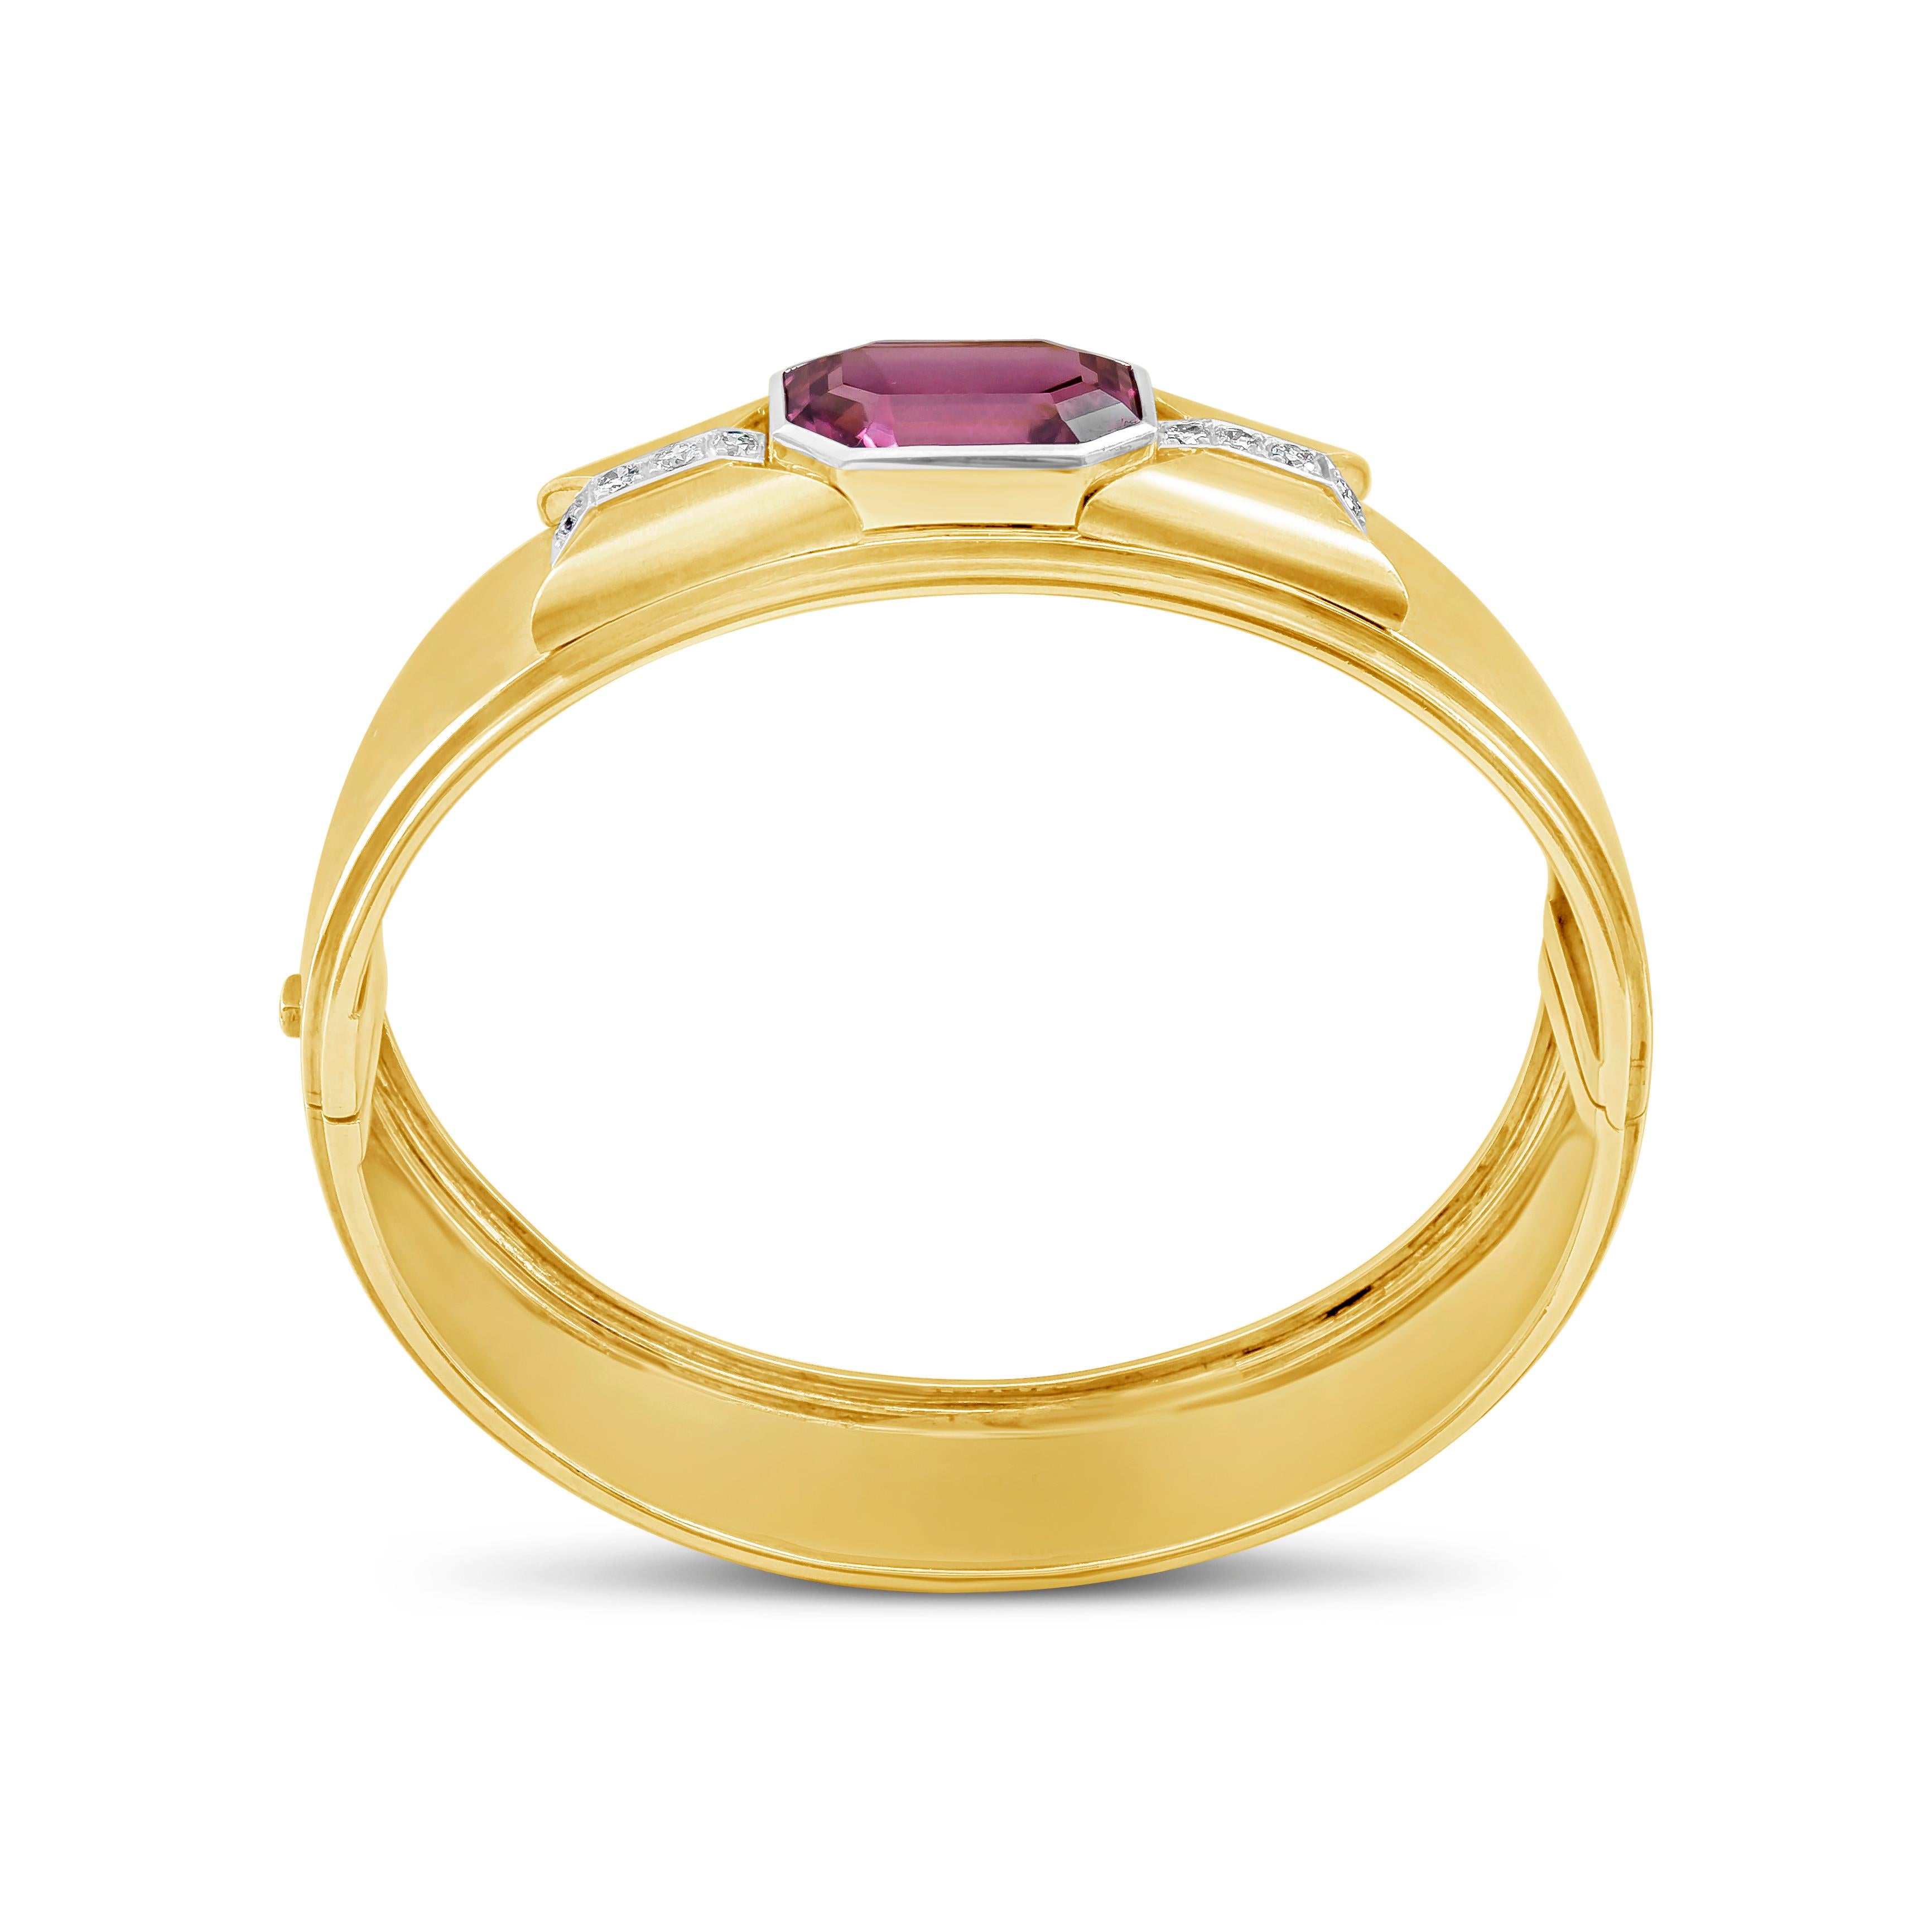 An antique bangle bracelet showcasing a octagonal step-cut GIA Certified pink tourmaline 10.50 carats total, accented by 4 brilliant round diamonds on each side weighing 0.30 carats. Set and made in 18K Yellow Gold, Hinge clasp for secure fit. 